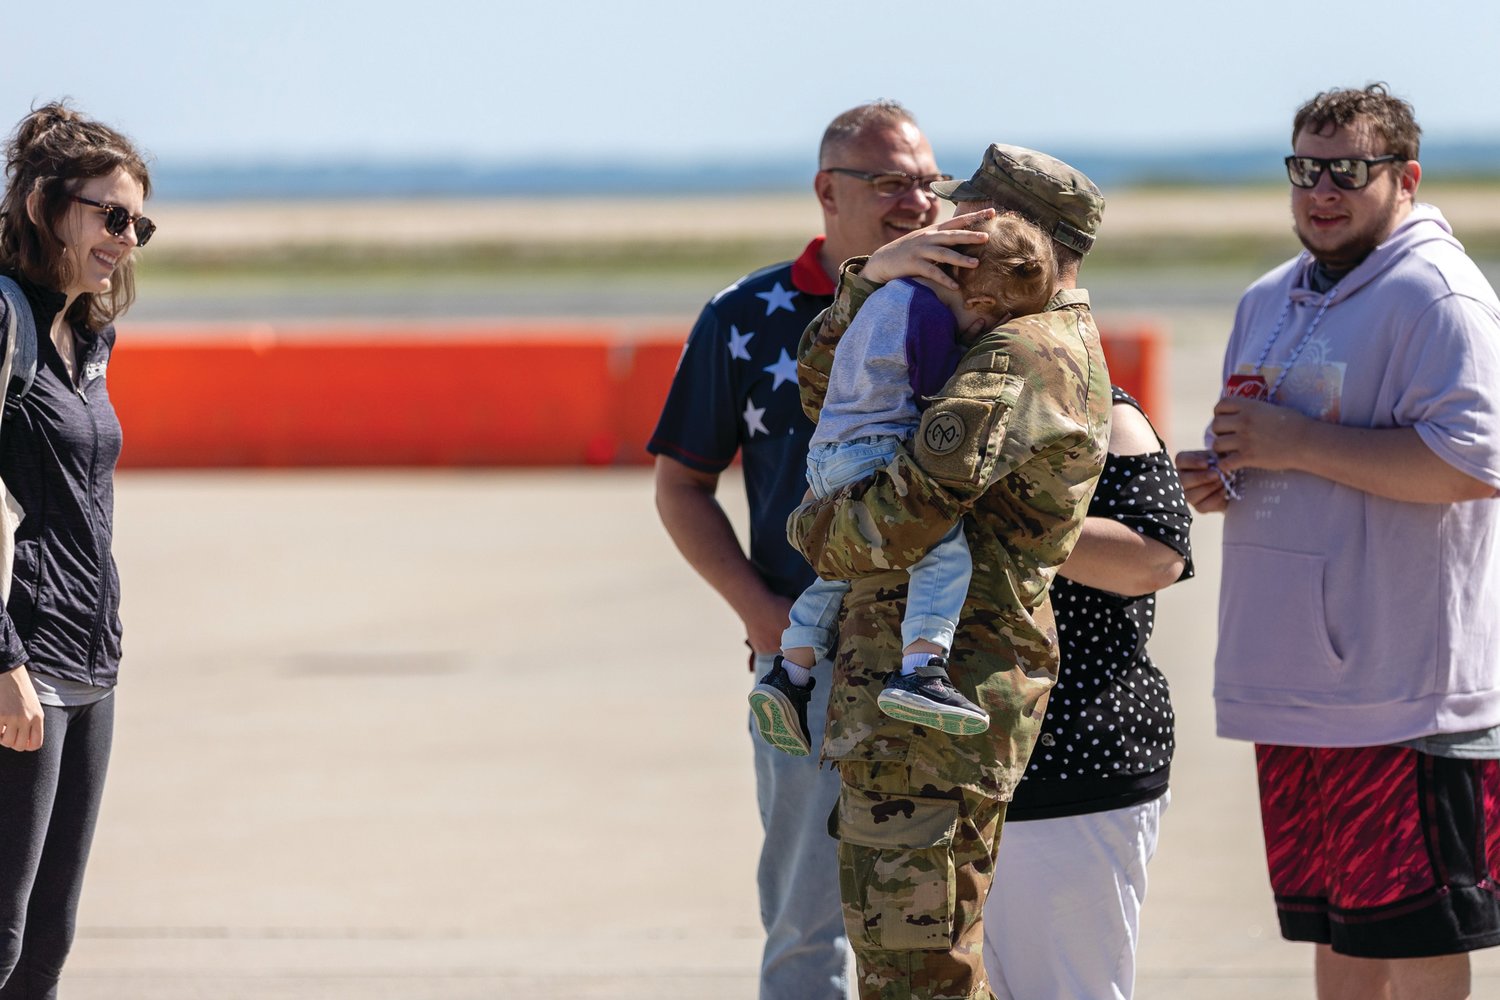 GOODBYES: Specialist Connor Wood from Killingly, Connecticut, says goodbye before deployment. The Rhode Island National Guard hosted a departure ceremony for Alpha Company, 1-182nd Infantry Battalion, nicknamed “Attack” Company, at the Army Aviation Support Facility on Quonset Air National Guard Base on Memorial Day.